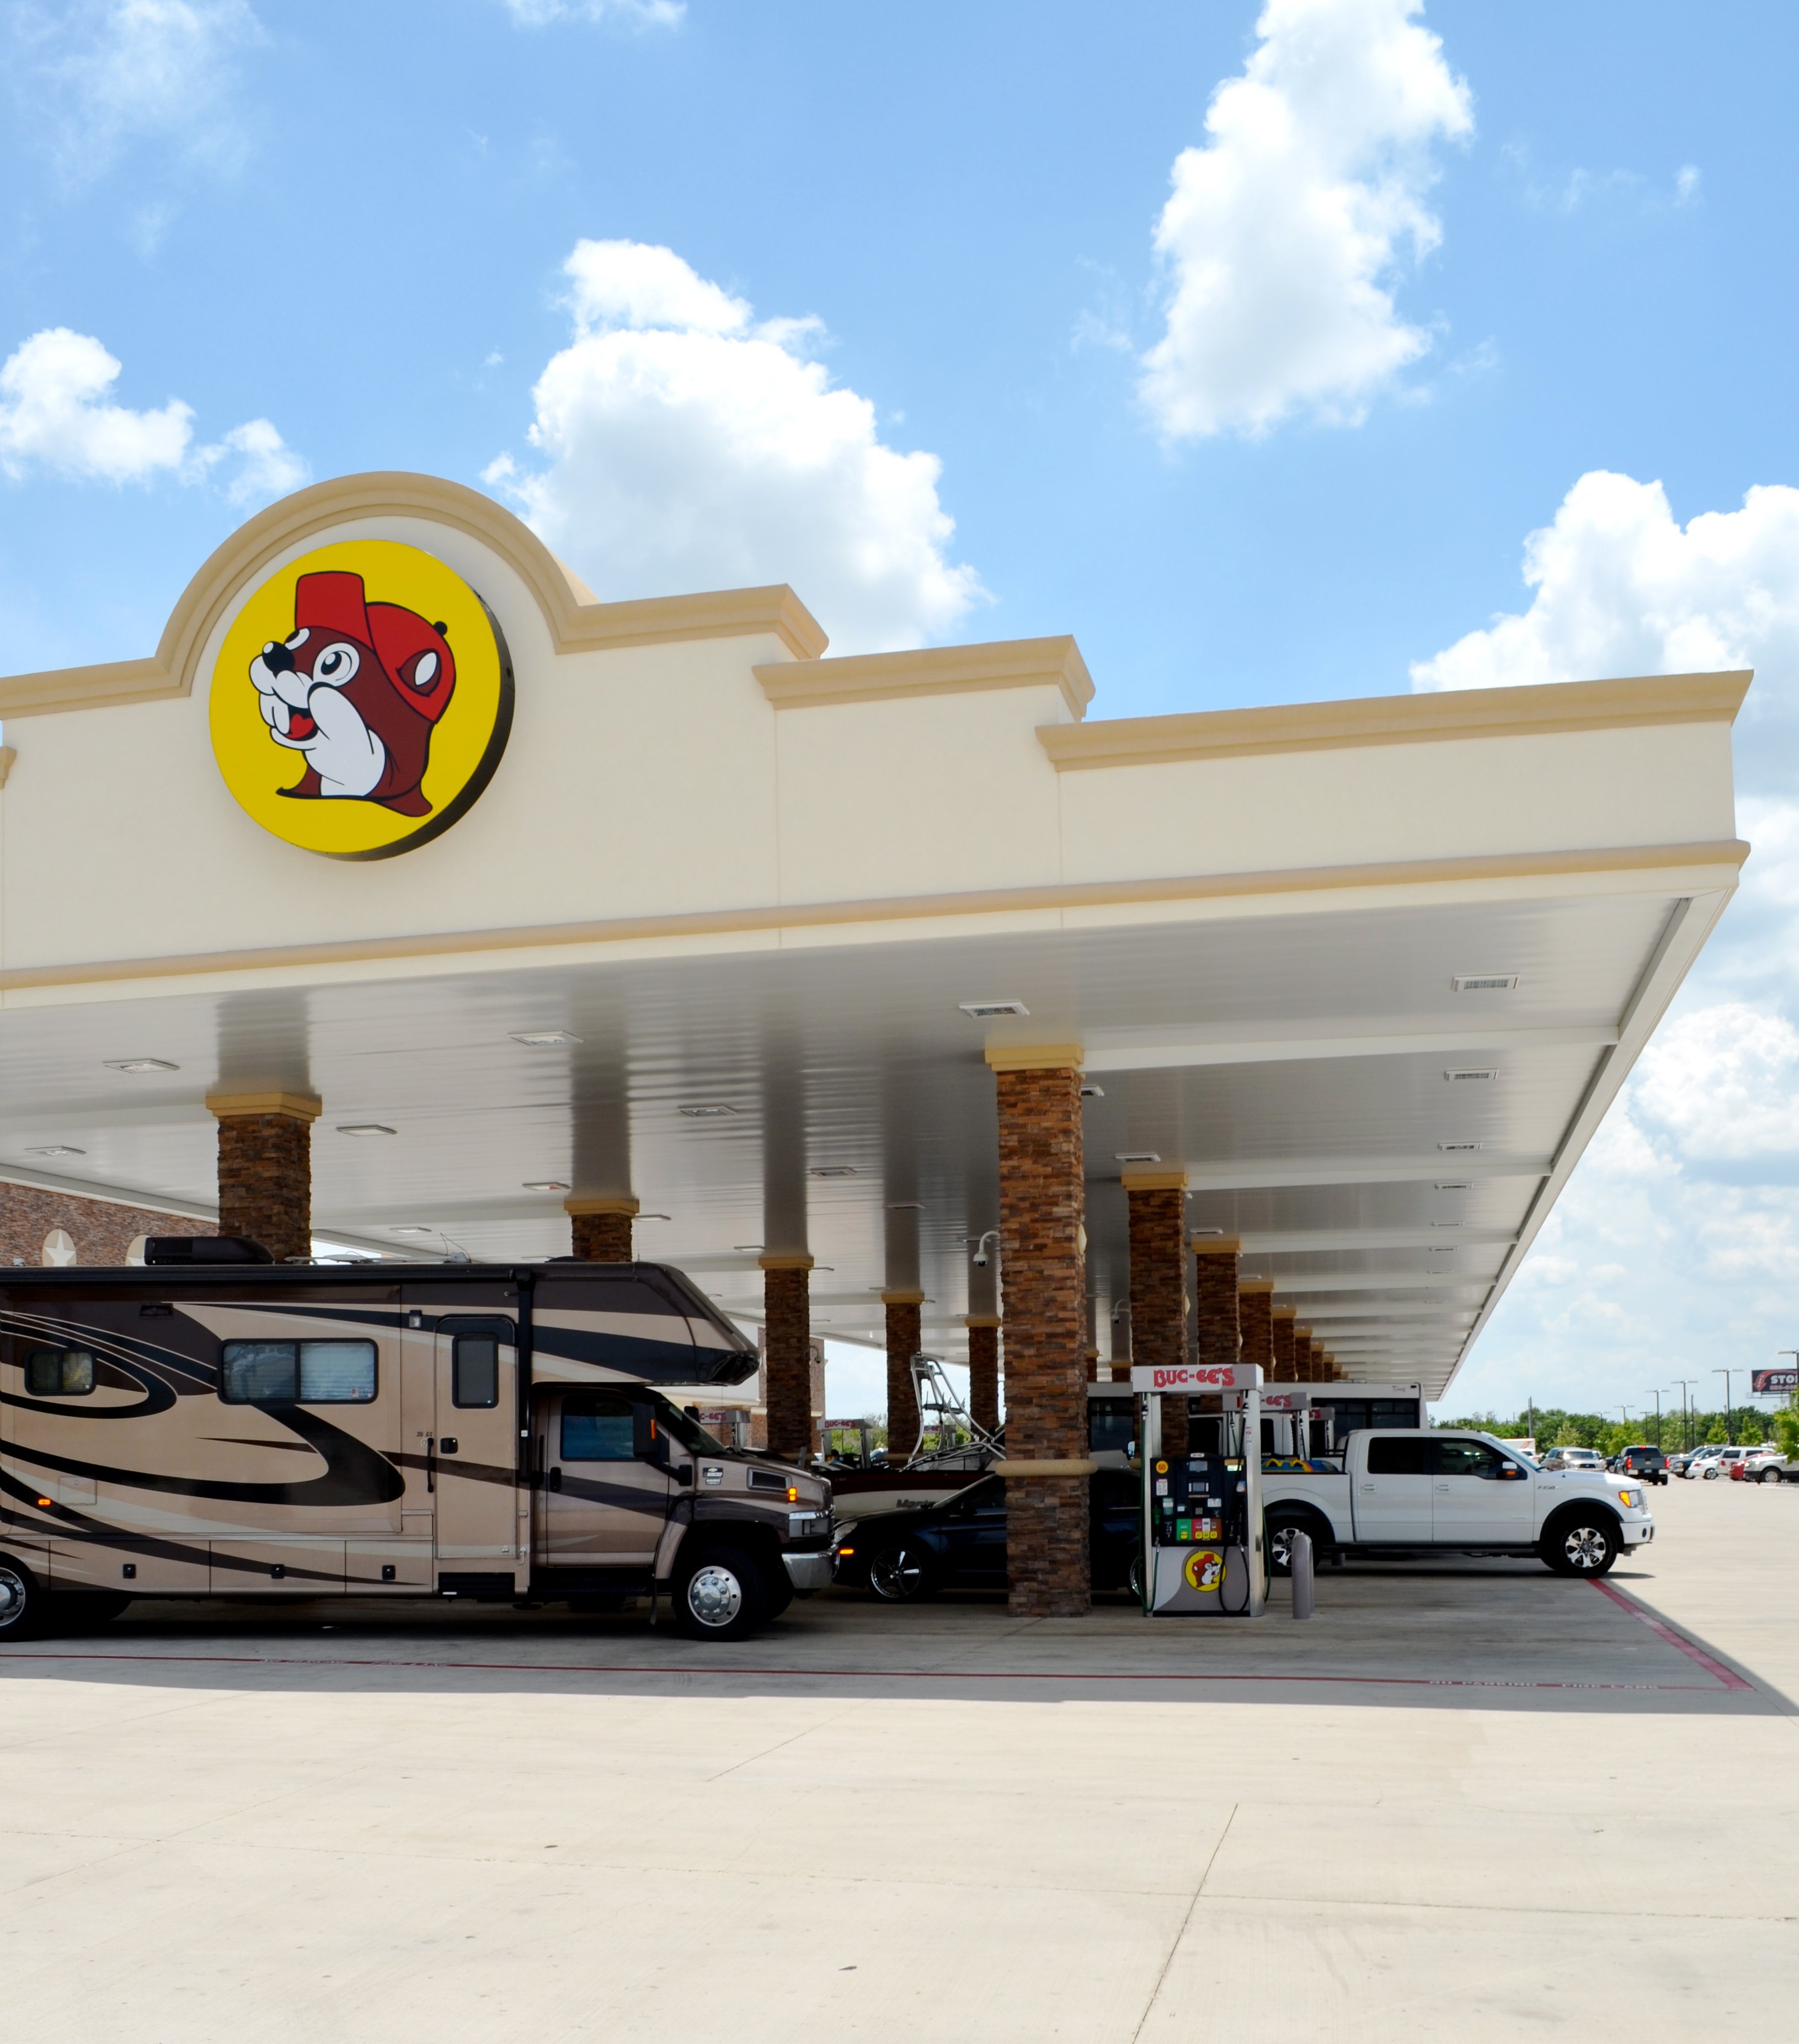 What is Bucees